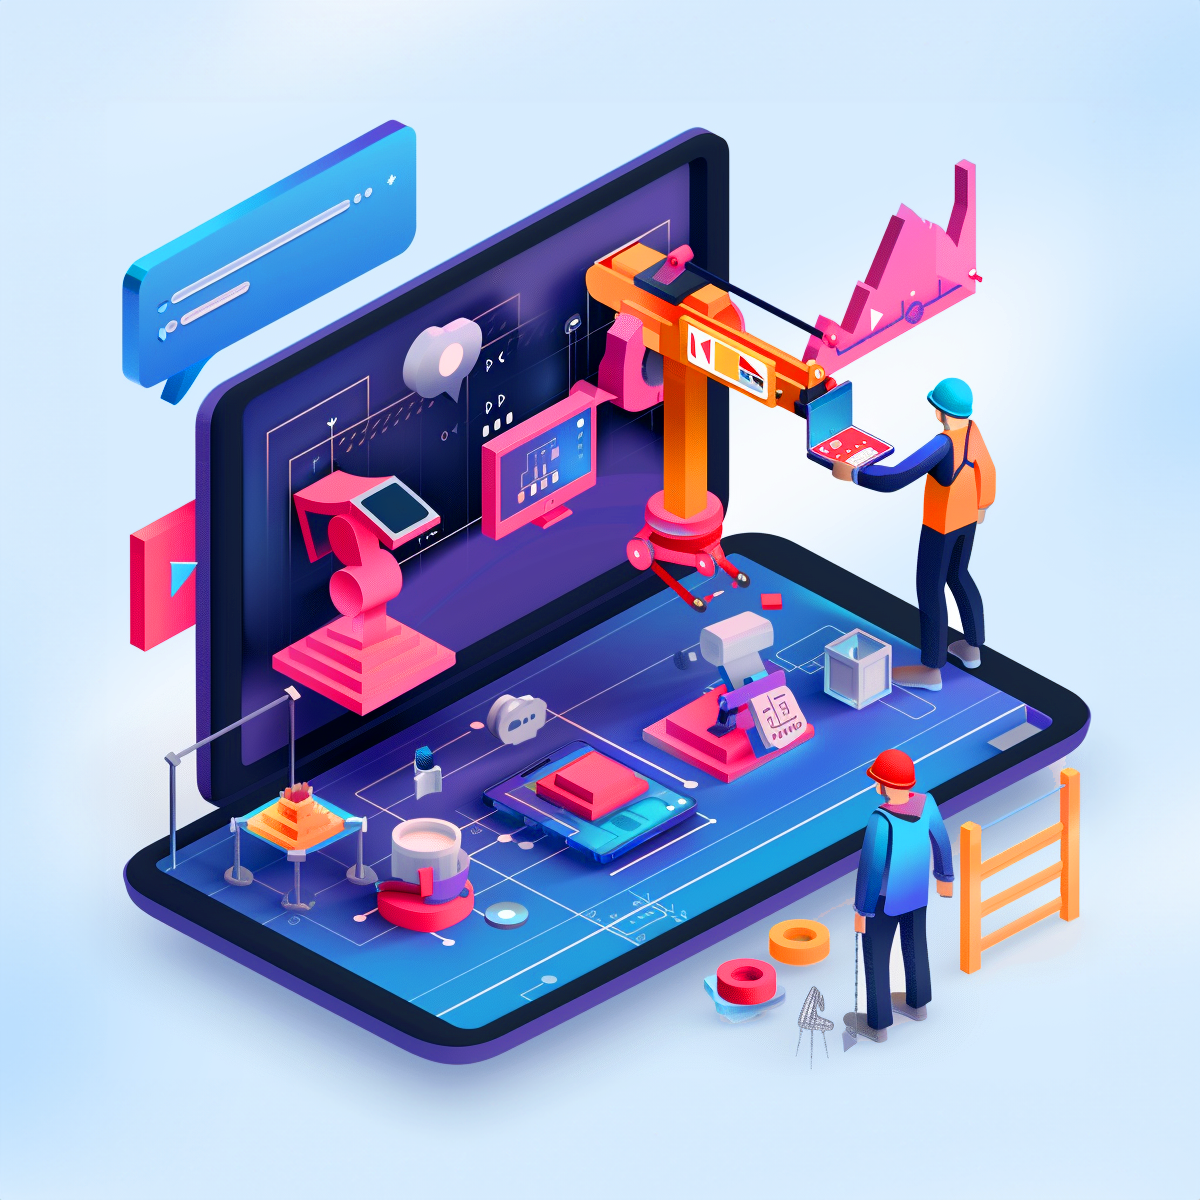 yinnetteolivo_isometric_3d_software_engineering_and_app_design__b89f7f5e-dfde-436f-b36f-2497a5eb1e52